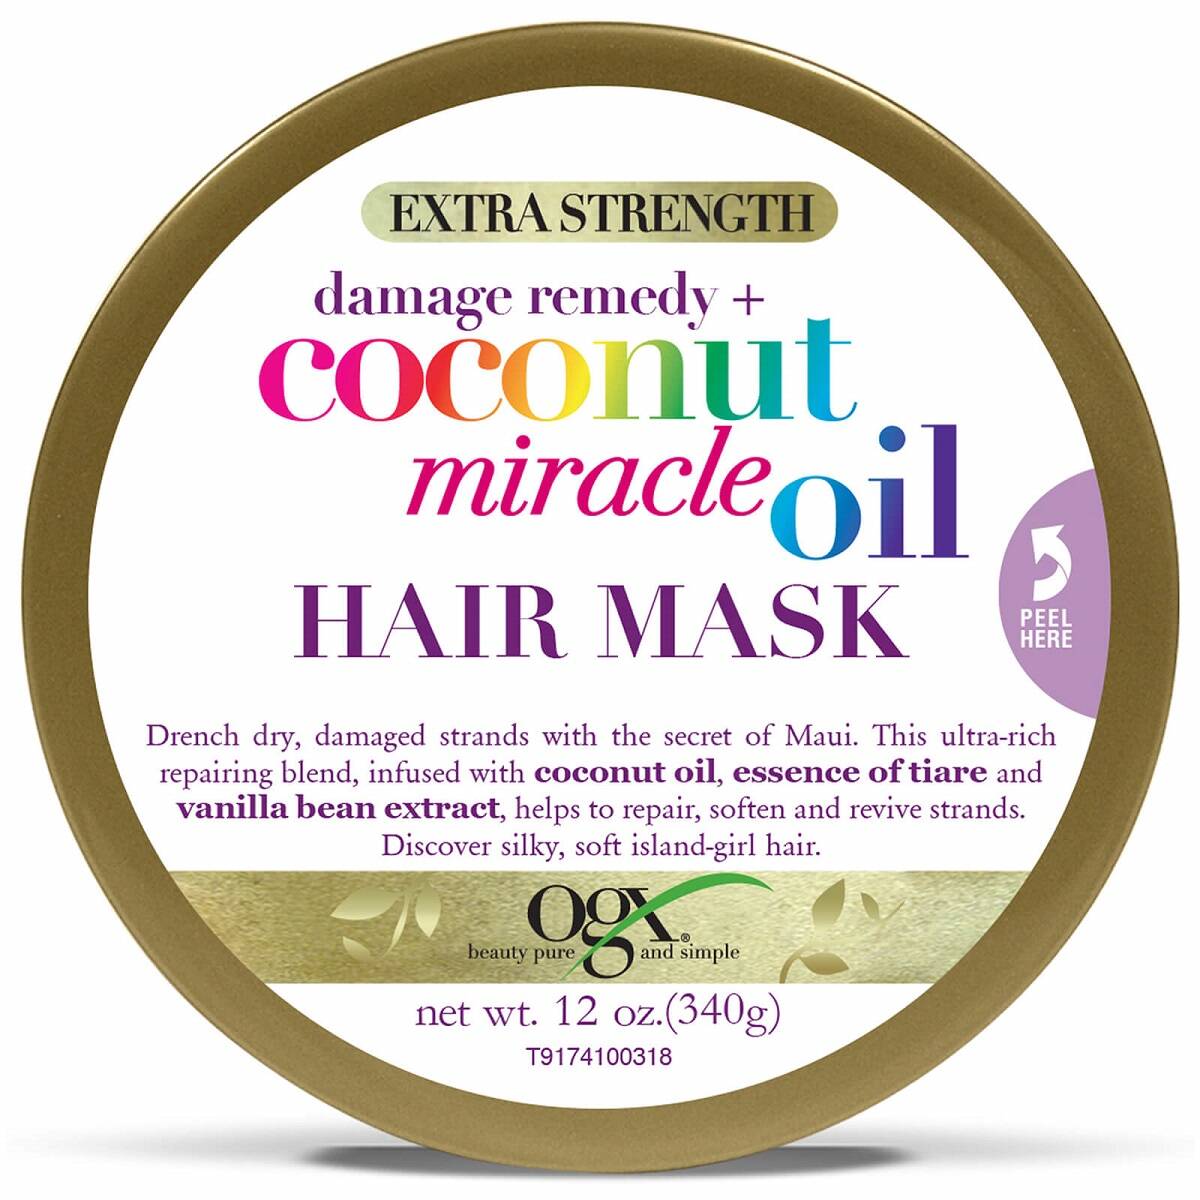 OGX Coconut Miracle HairMask (6)